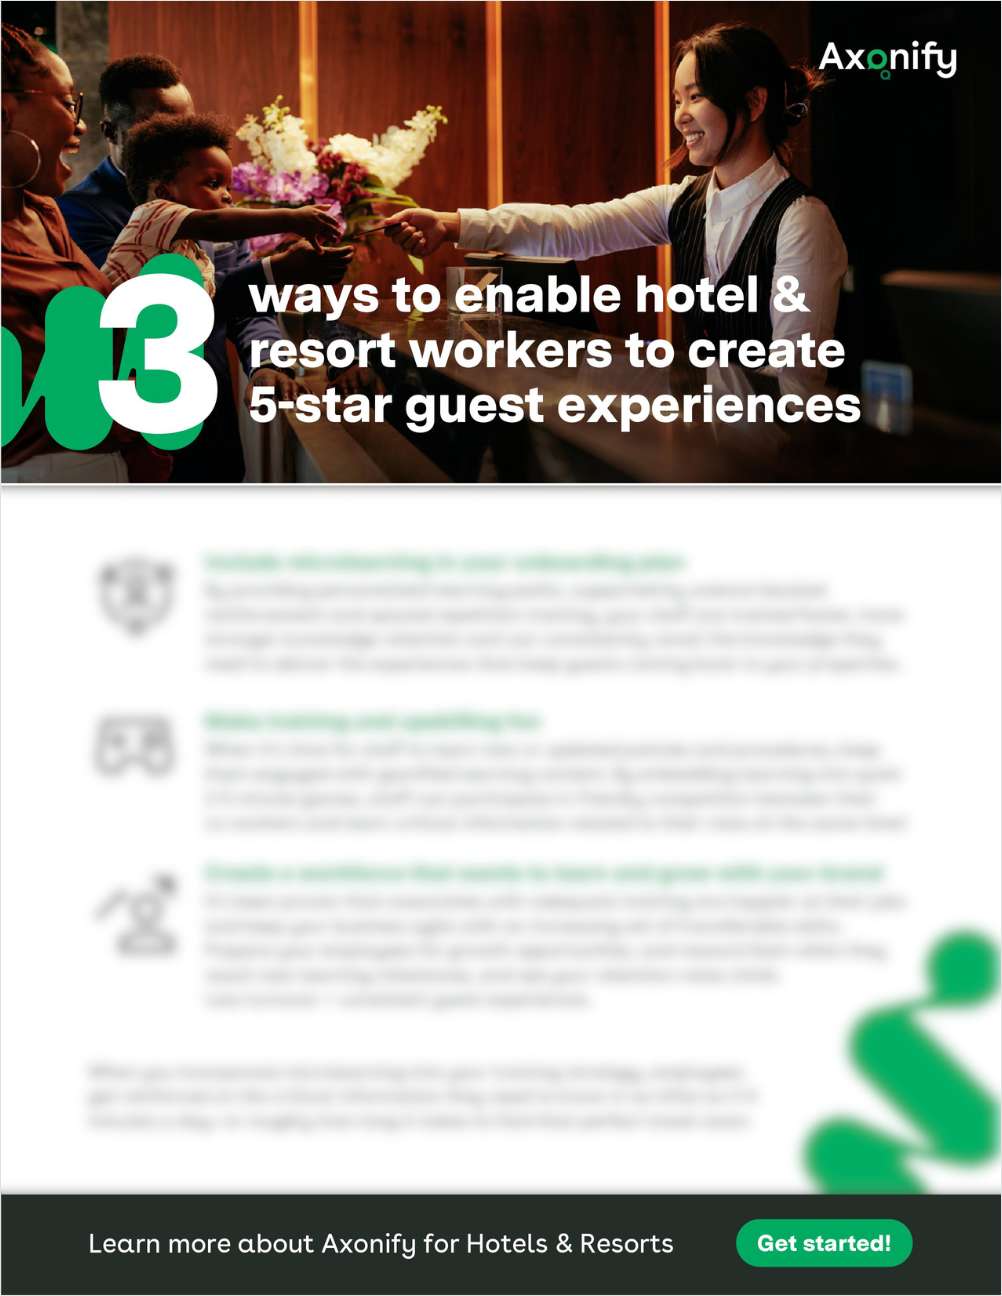 3 ways to enable hotel & resort workers to create 5-star guest experiences